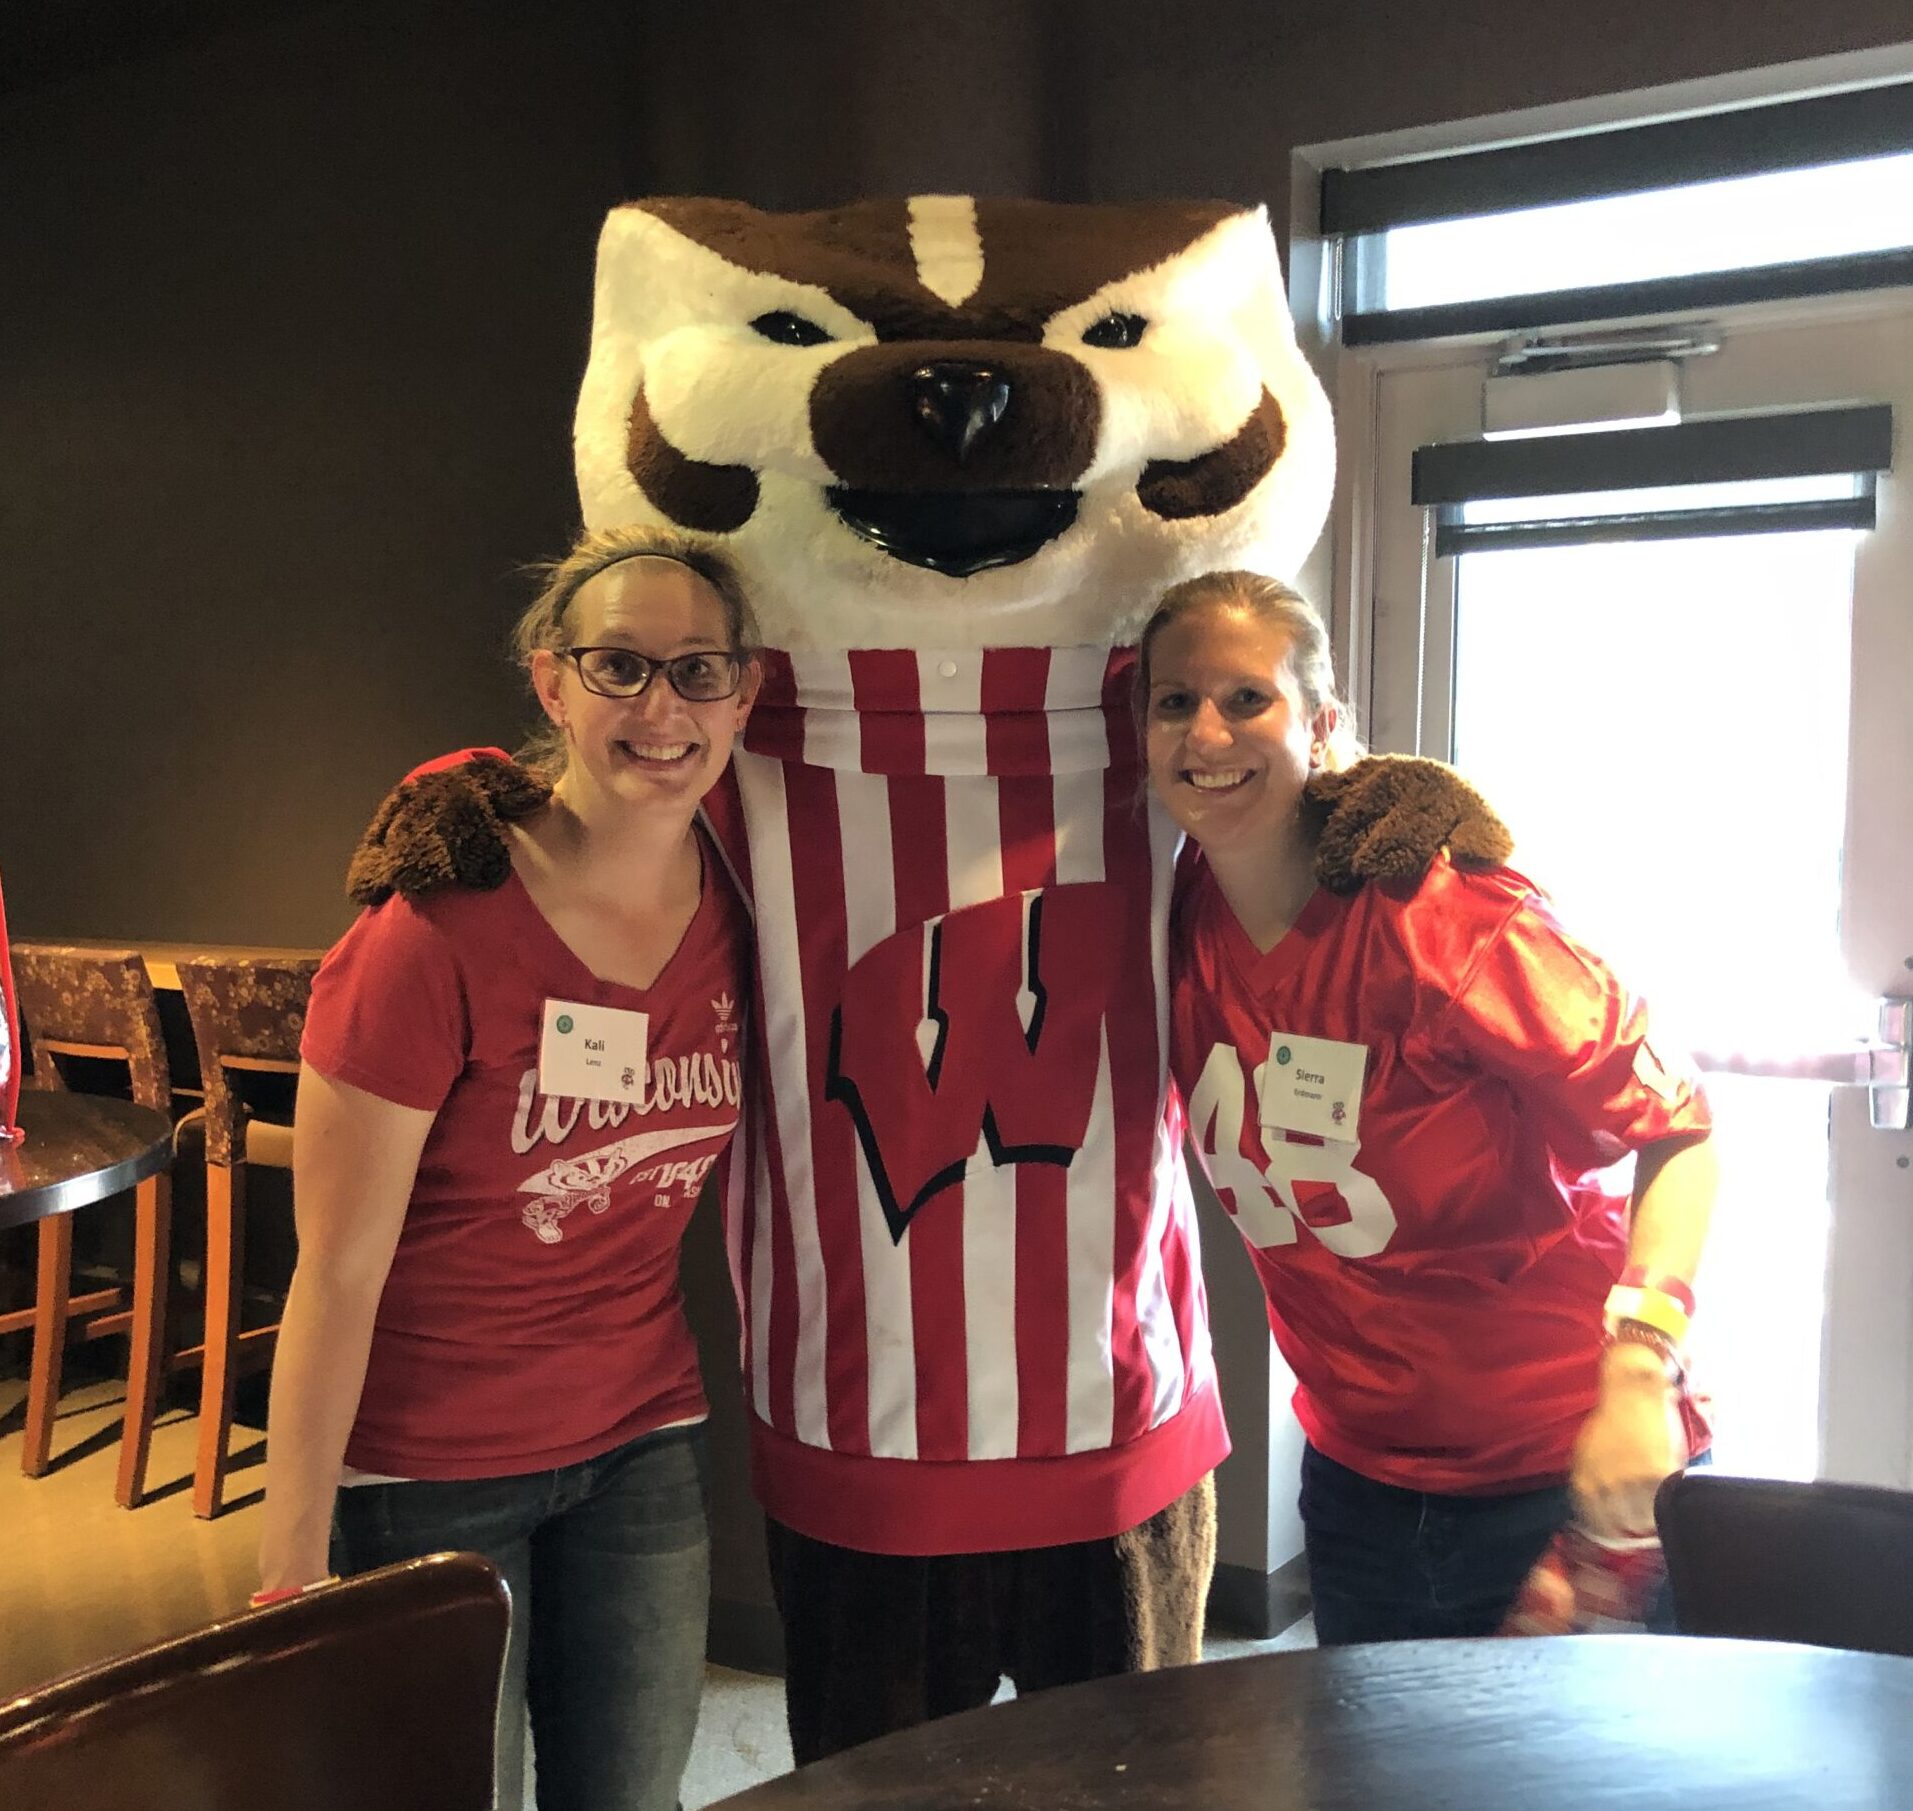 Sierra Erdmann standing with a friend and Bucky the Badger for a photo while wearing Wisconsin Badgers apparel. 